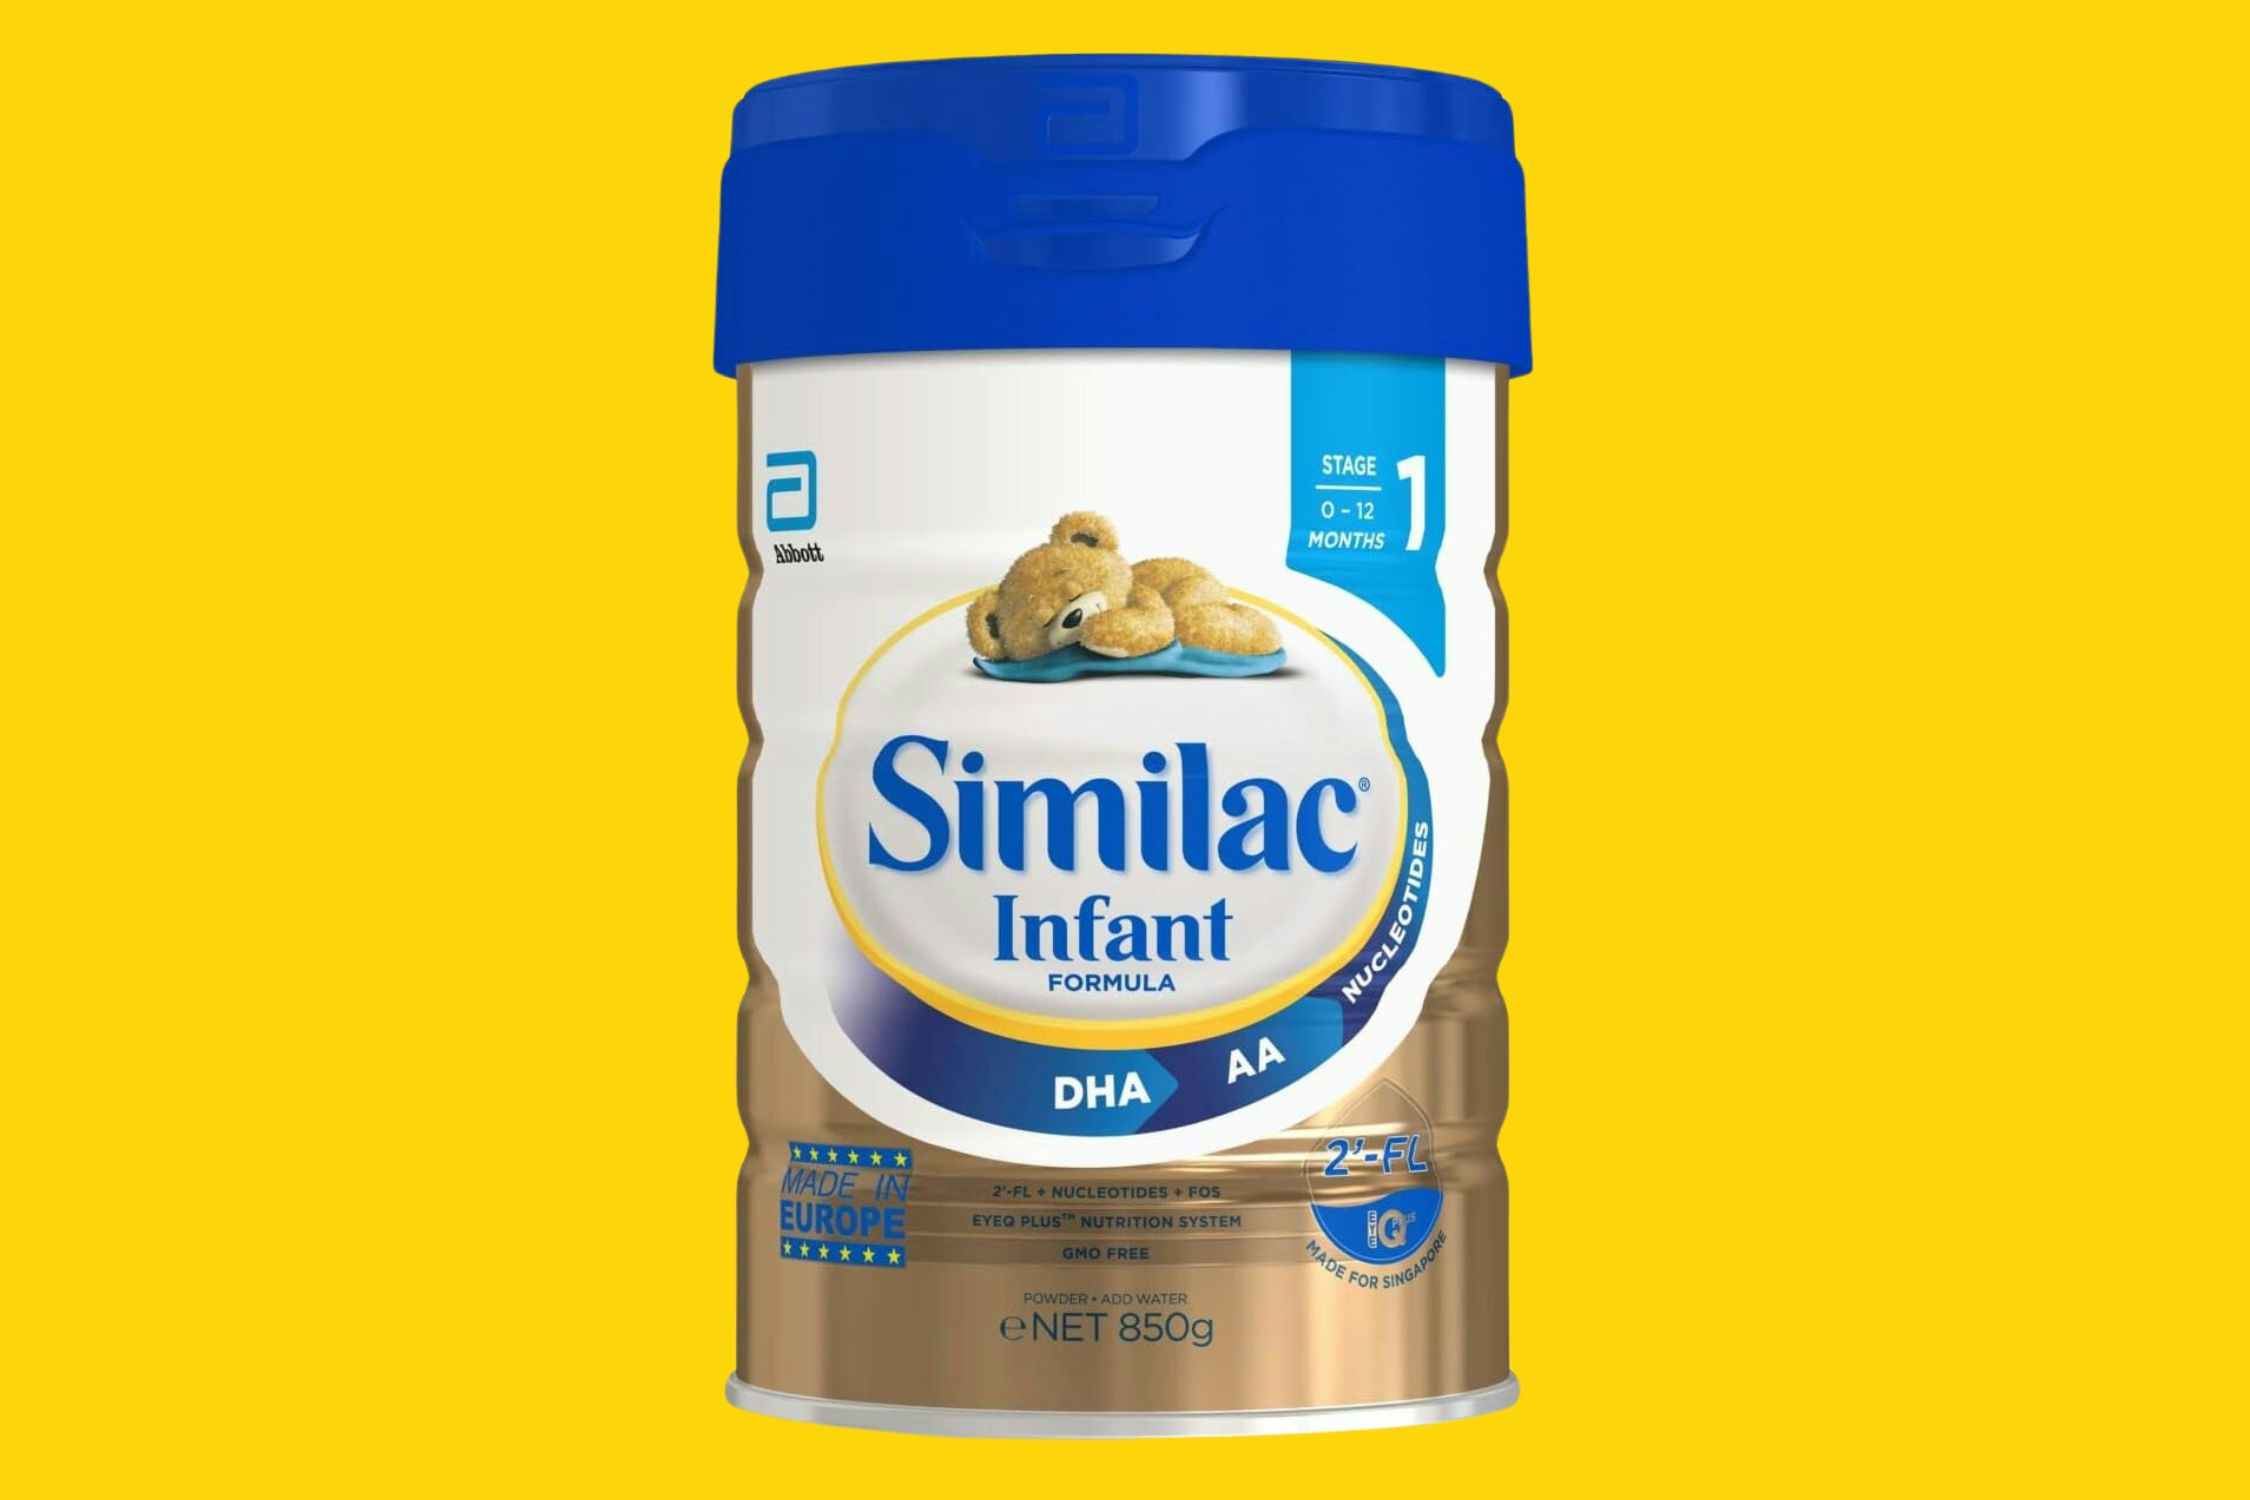 Similac 30-Ounce Baby Formula Powder, as Low as $8.66 on Amazon